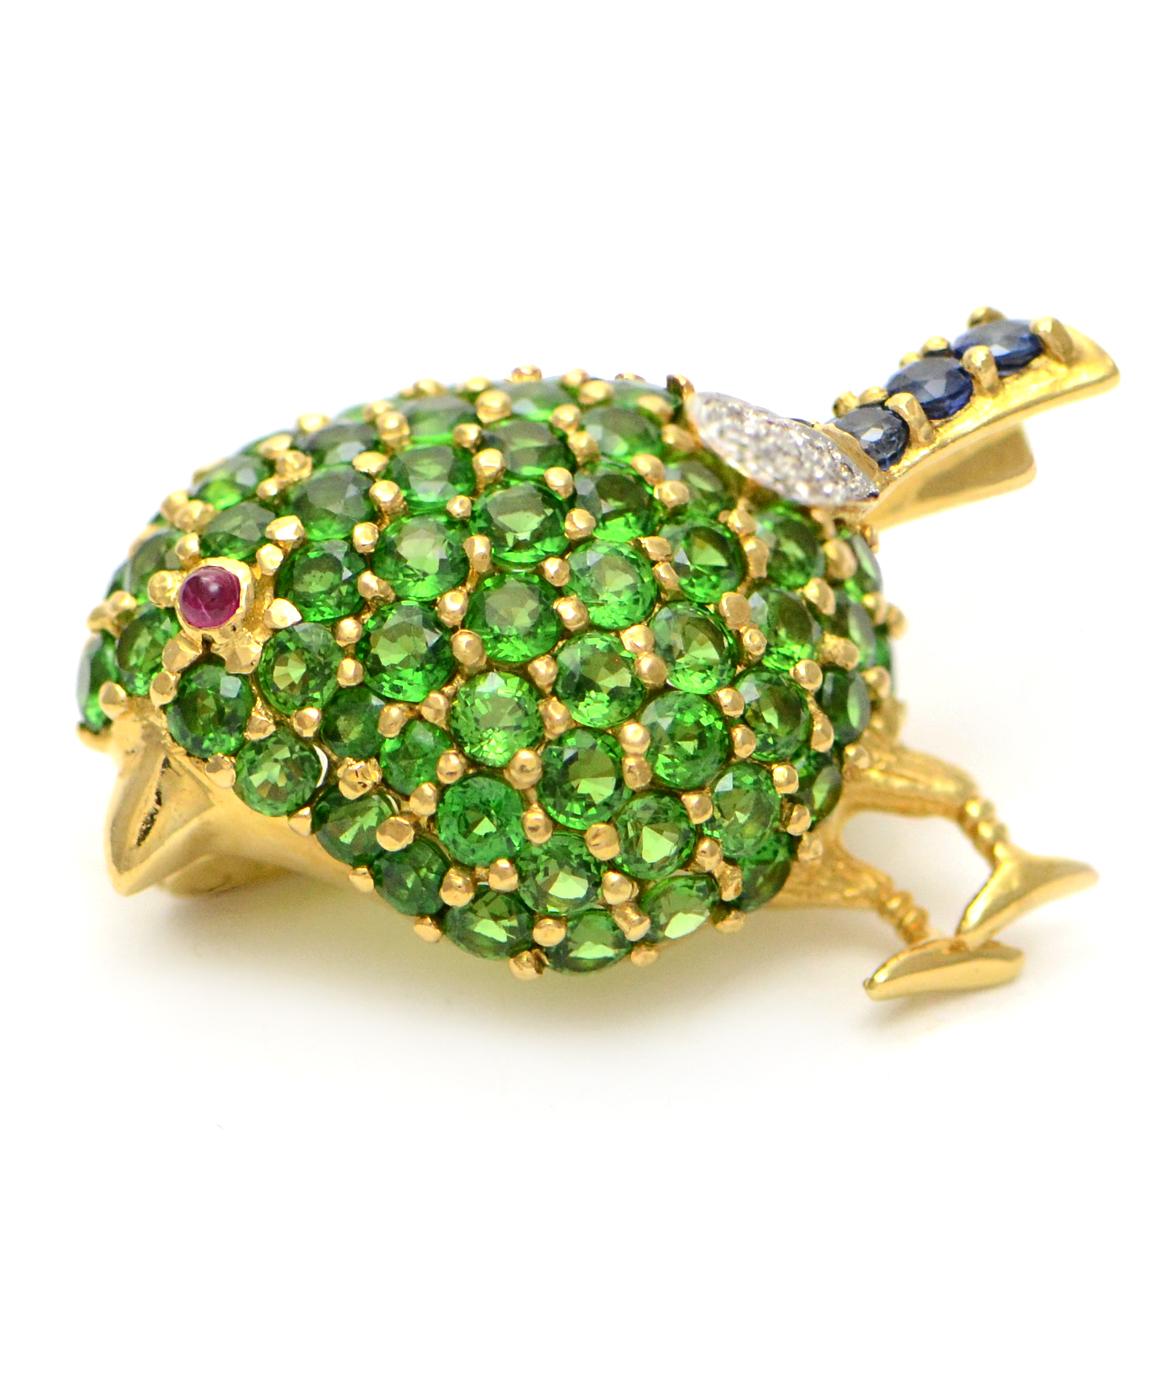 Solid 18K Yellow Bird Pin/ Pendant! Genuine Tsavorite, Ruby, Sapphire & Diamond

This stunning piece of art can be worn as a pendant or a brooch/ pin! It has a collapsable bail, and a pin to be worn however chosen! There are approximately six